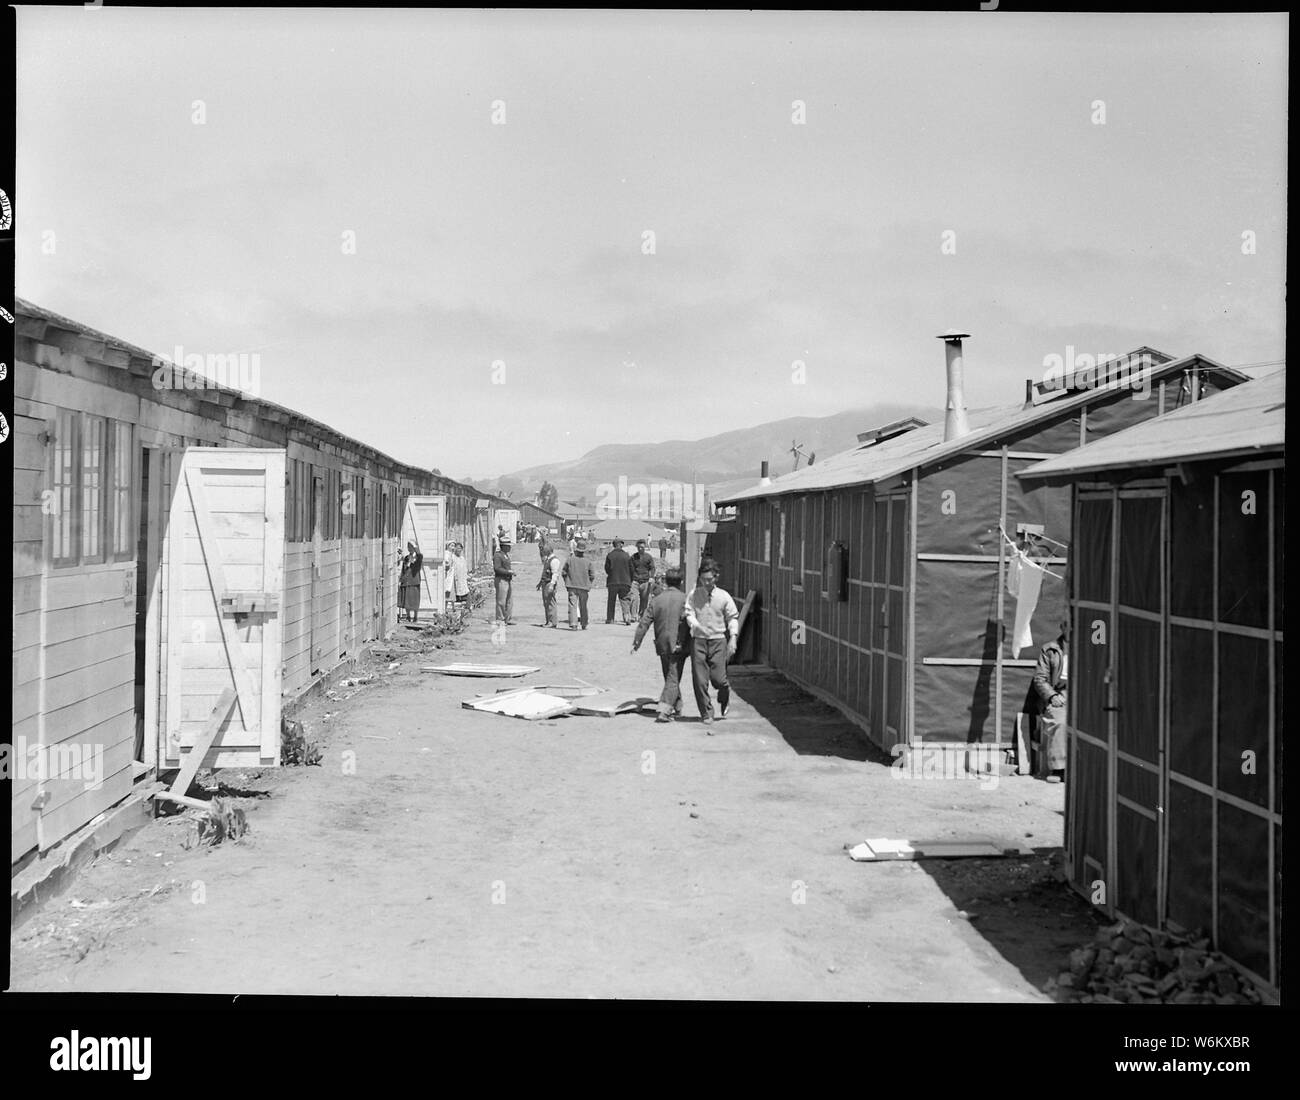 San Bruno, California. Looking down one of the avenues between rows of barracks. The ones on the r . . .; Scope and content:  The full caption for this photograph reads: San Bruno, California. Looking down one of the avenues between rows of barracks. The ones on the right are converted horse stalls, and those on the left are newly contructed and typical of an assembly center and relocation centers throughout the west. They are 100 feet long, covered with black tar paper, contain five 1-room apartments, each of which accomodate a family. The attitudes of the people in this photograph are typica Stock Photo